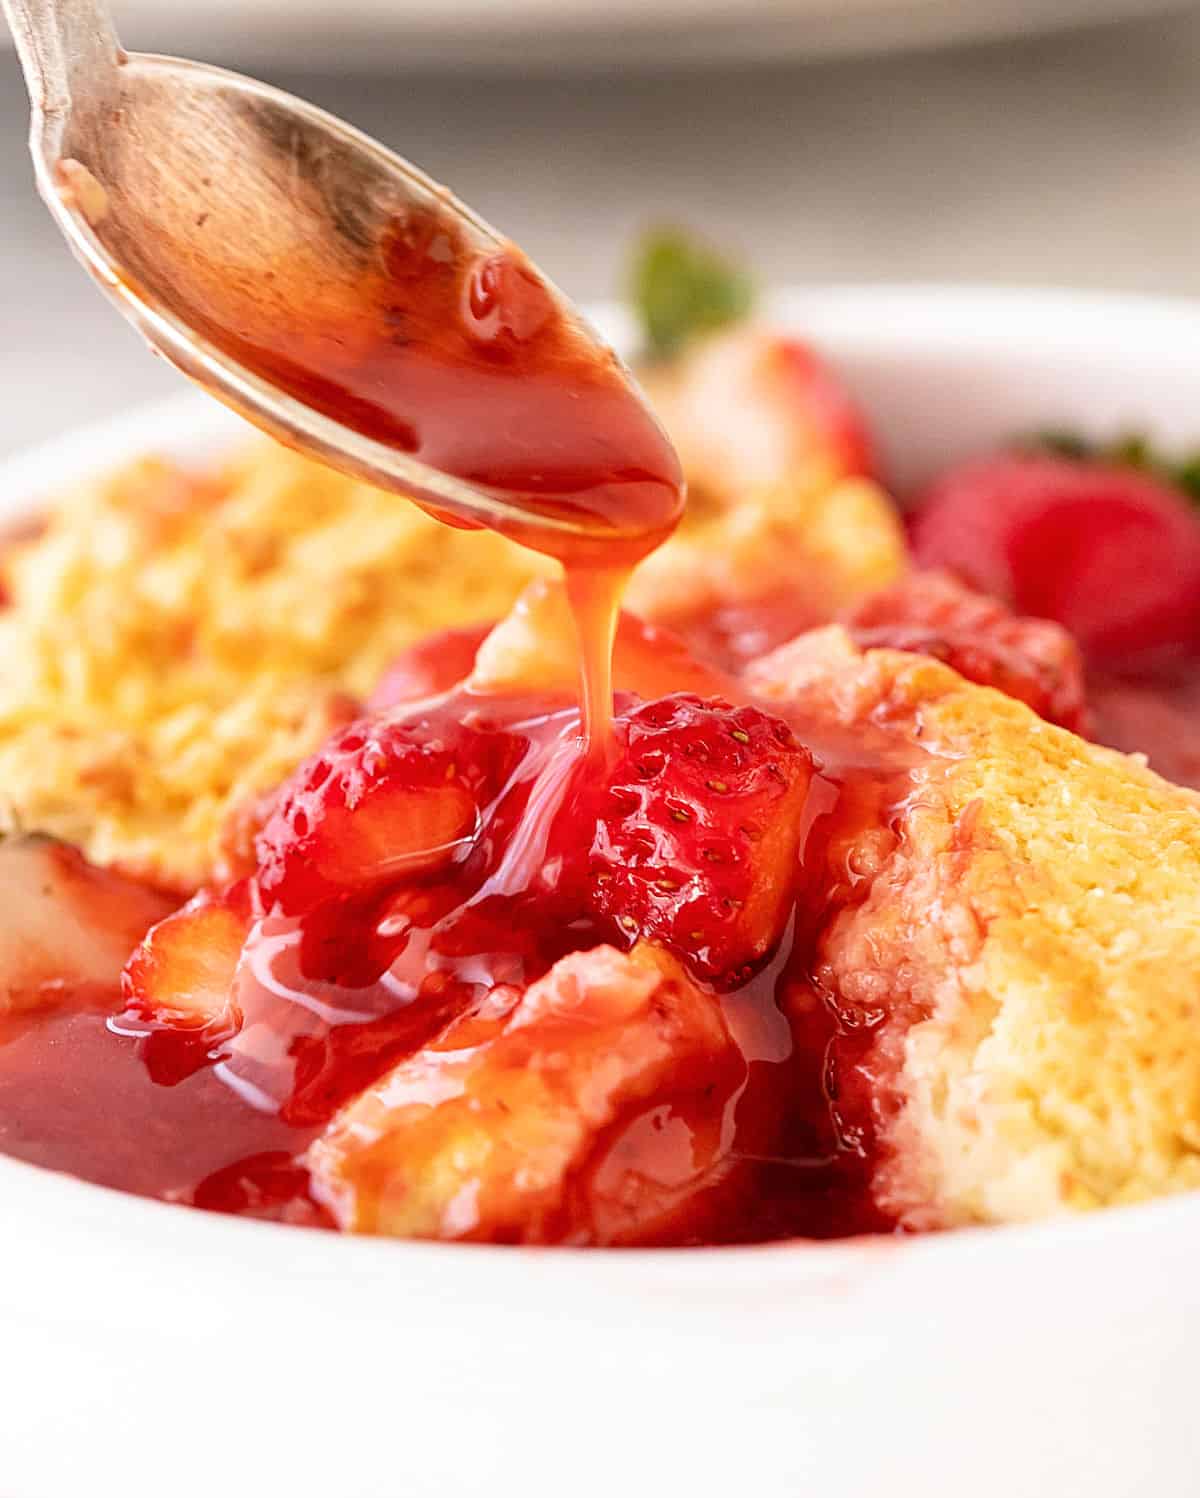 Silver spoon dripping stawberry syrup over serving of cobbler in white bowl.